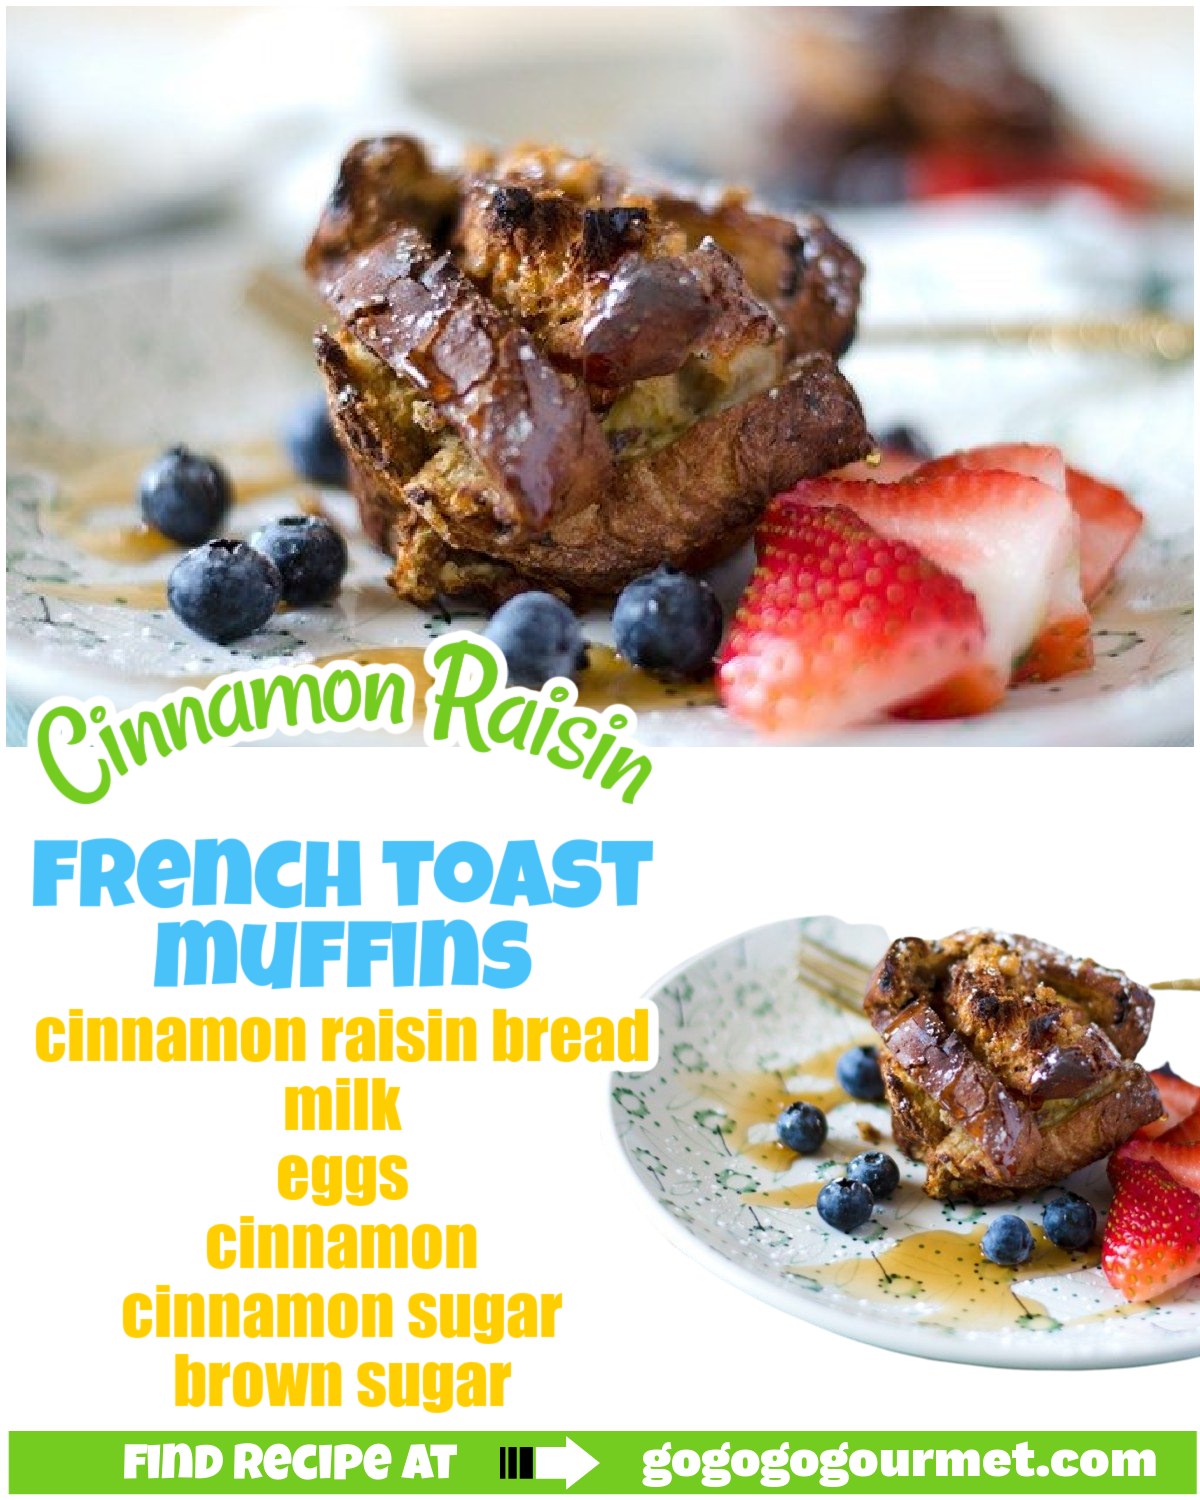 These easy Cinnamon Raisin French Toast Muffins are perfect for a weekend brunch! So full of cinnamon flavor and great served with fruit. via @gogogogourmet